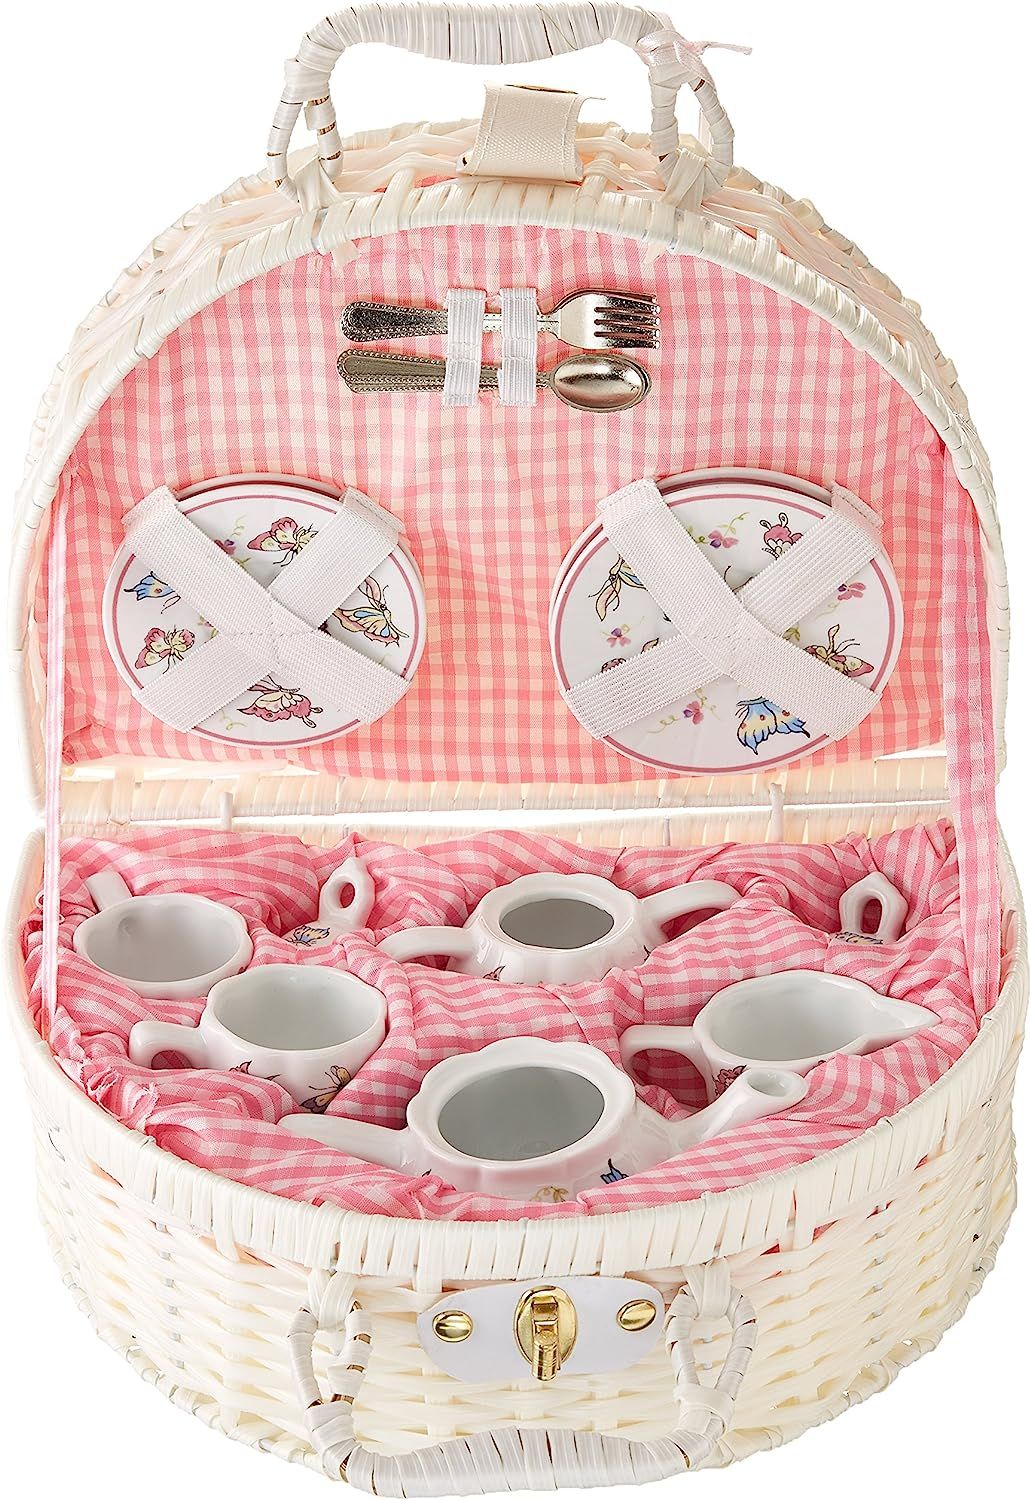 Delton Products Pink Butterfly Children's Tea Set with Basket | Amazon (US)